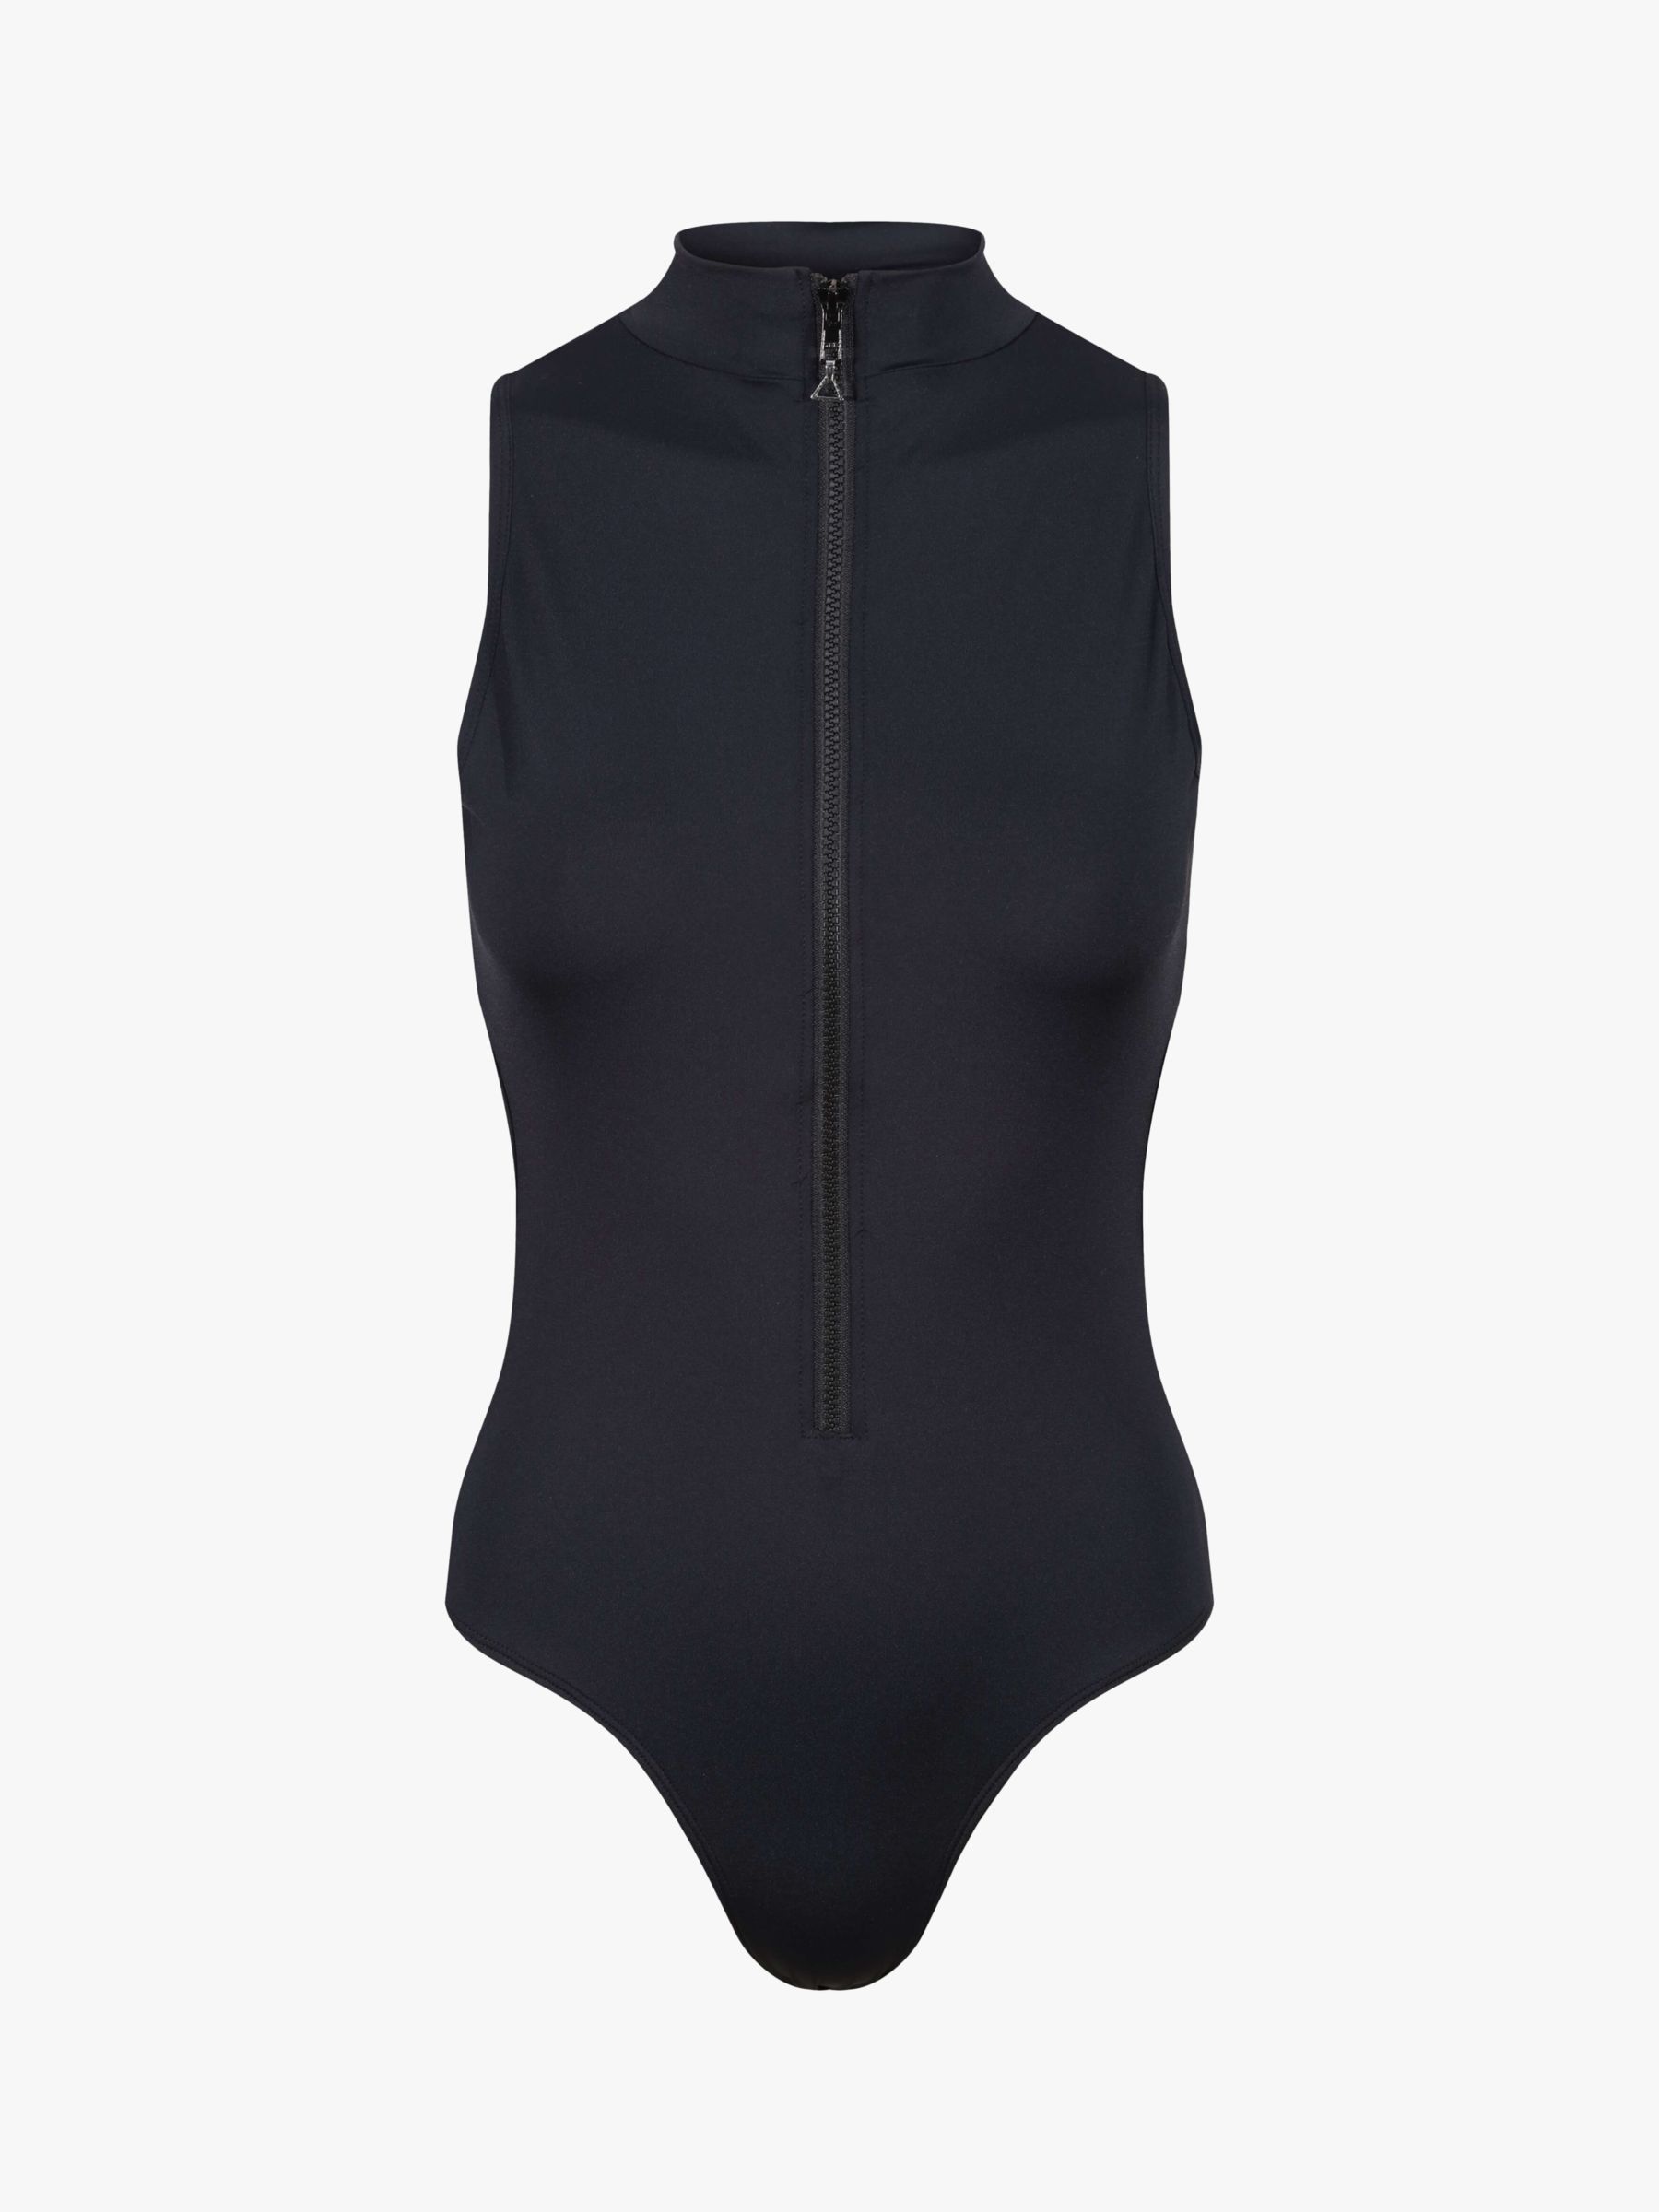 Davy J The Power Cut Out Swimsuit, Black